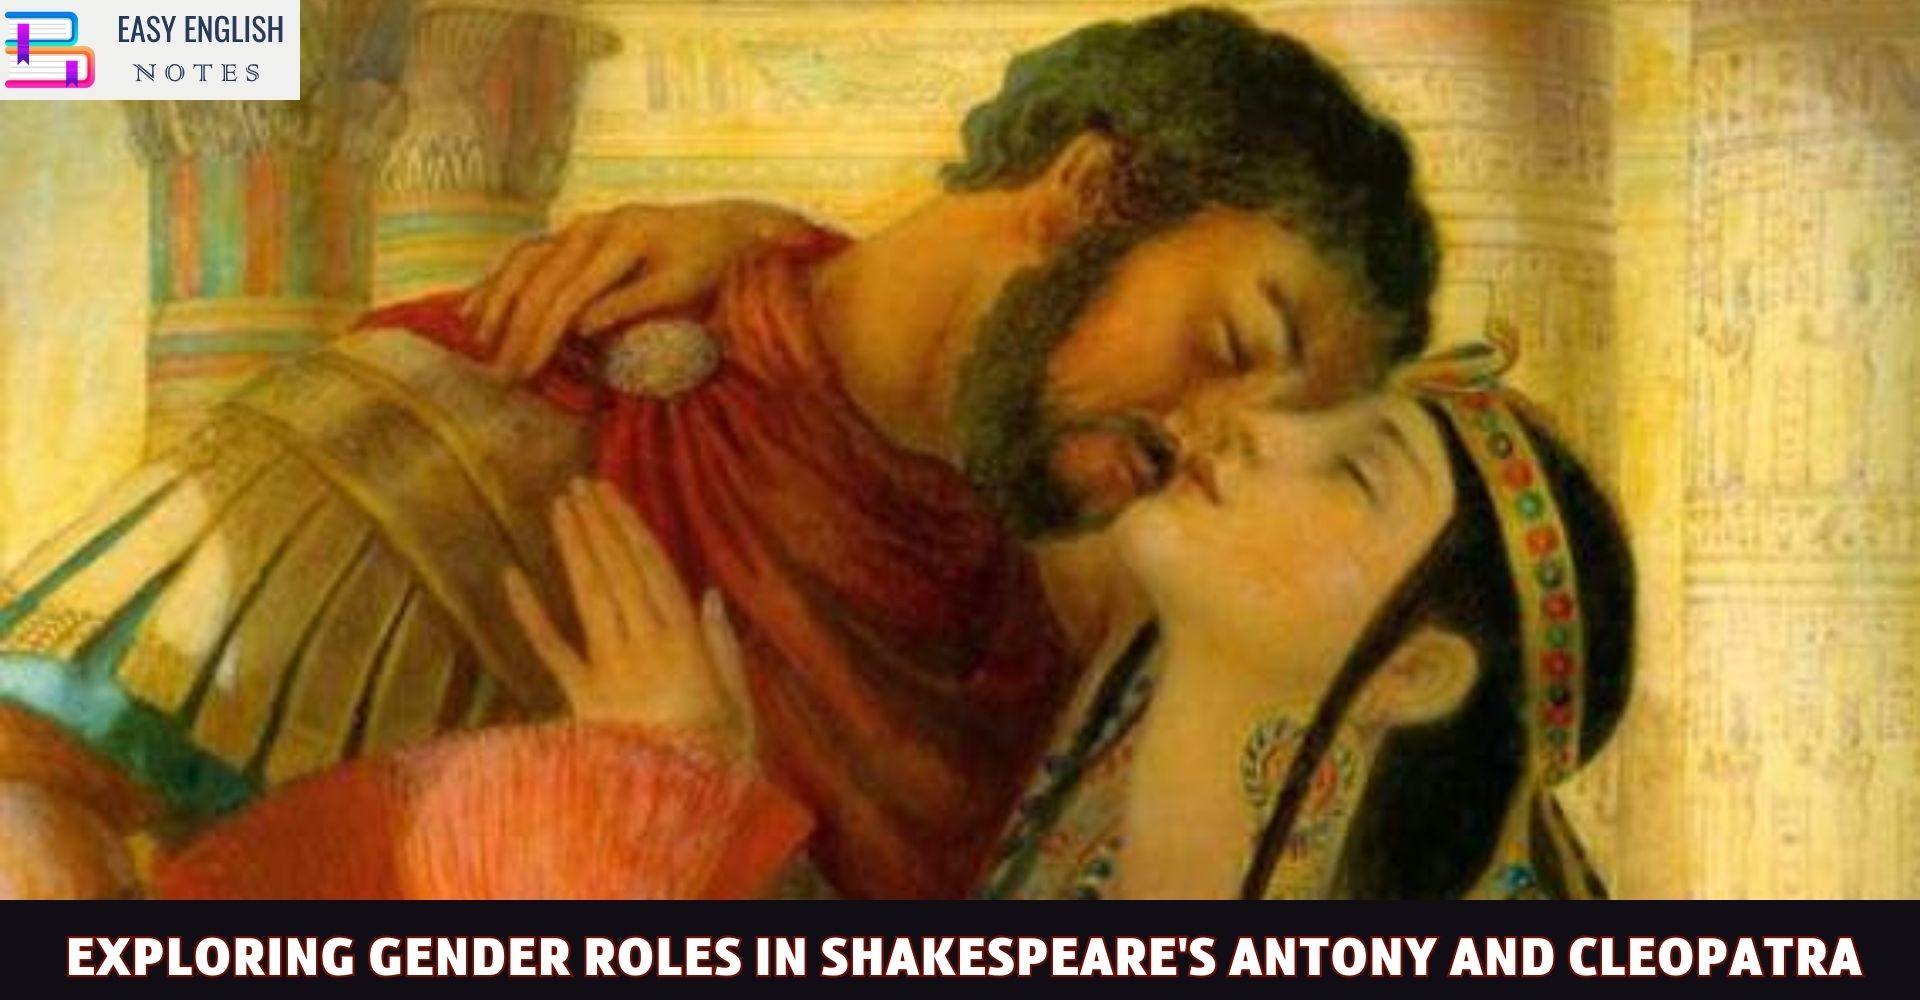 Exploring Gender Roles in Shakespeare's Antony and Cleopatra